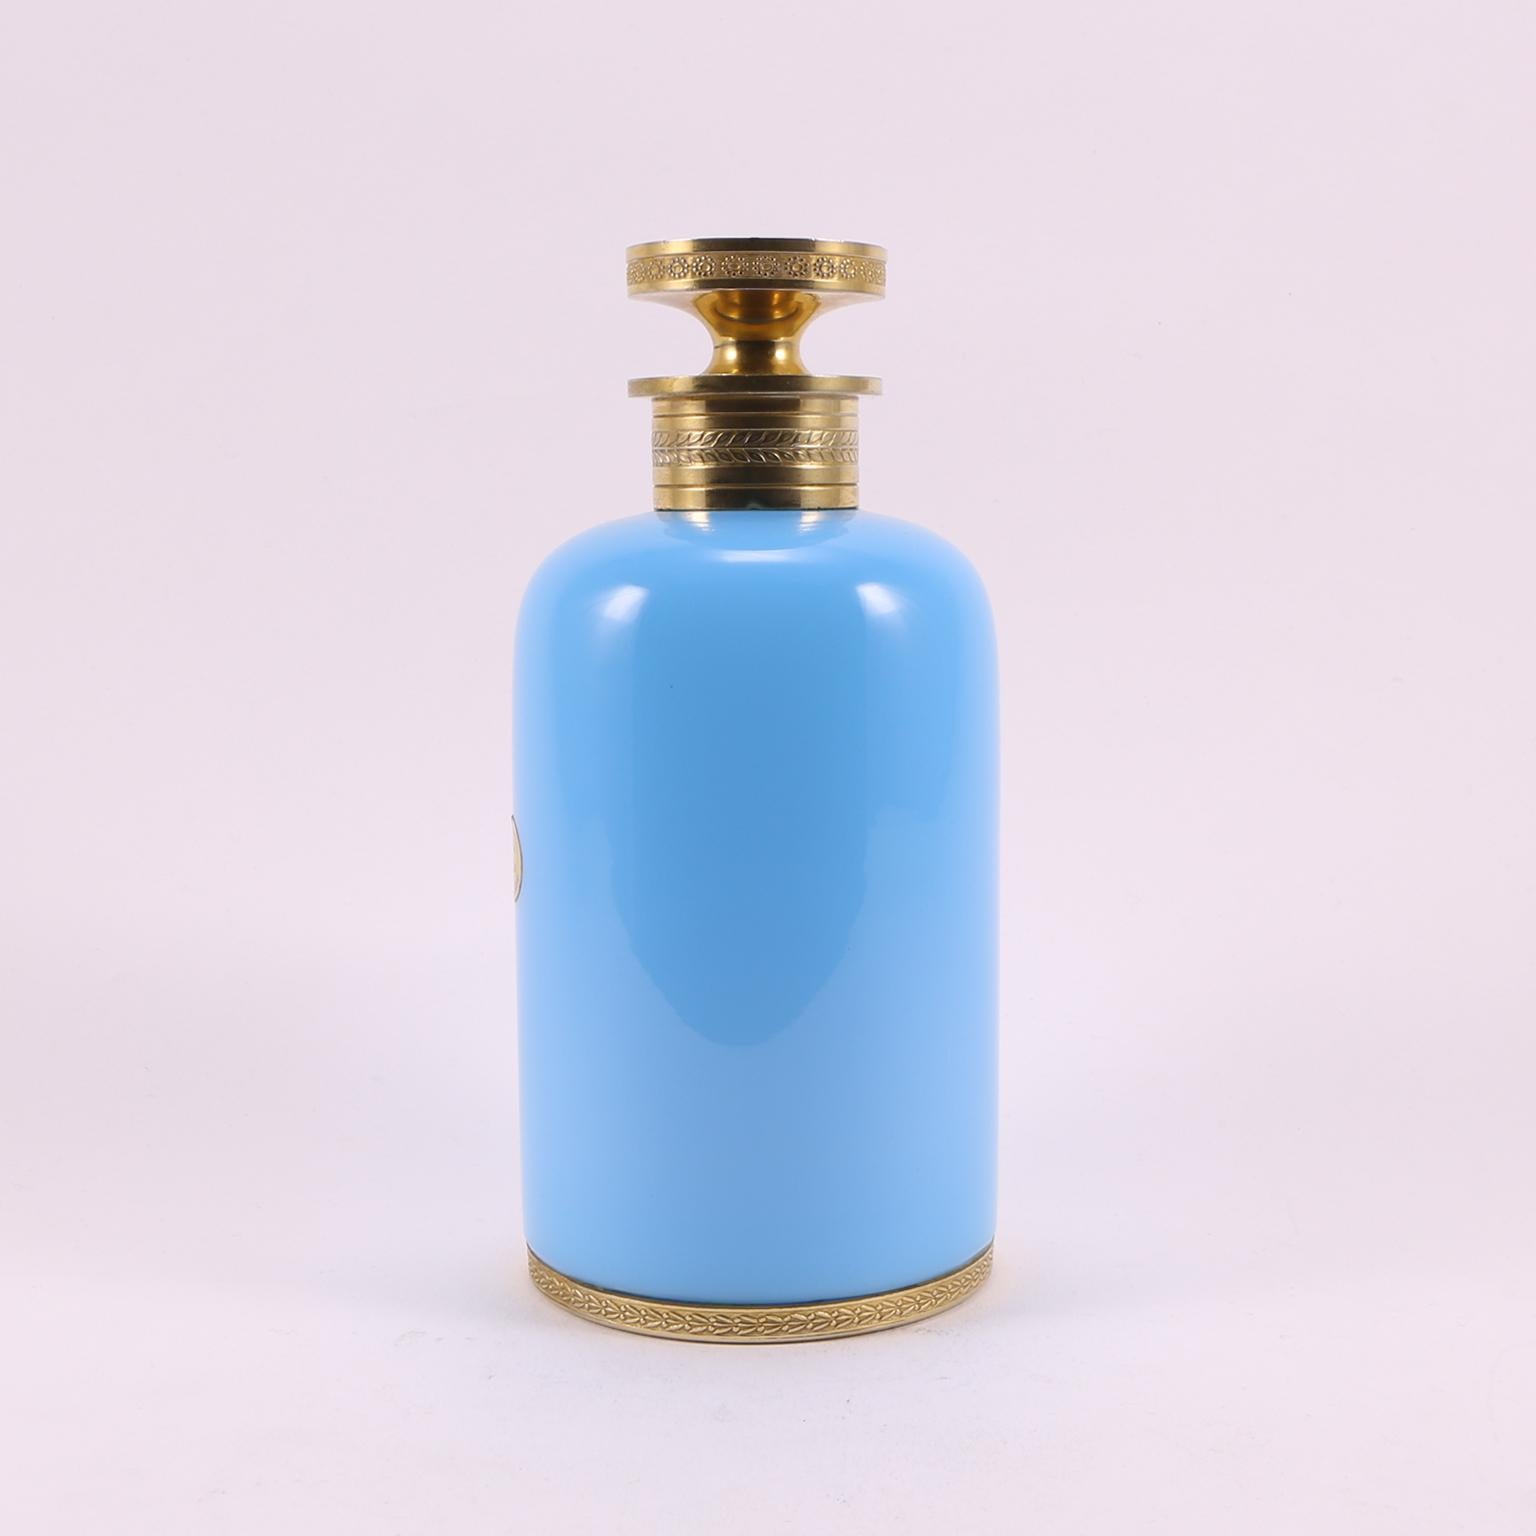 This is a fine and antique Sèvres opaline glass perfume bottle from 1920, hand blown in France, in a charming light turquoise tone and gold metal details.
It was realized by the Famous Designer and Producer L. Seiler.
With original ribbon and